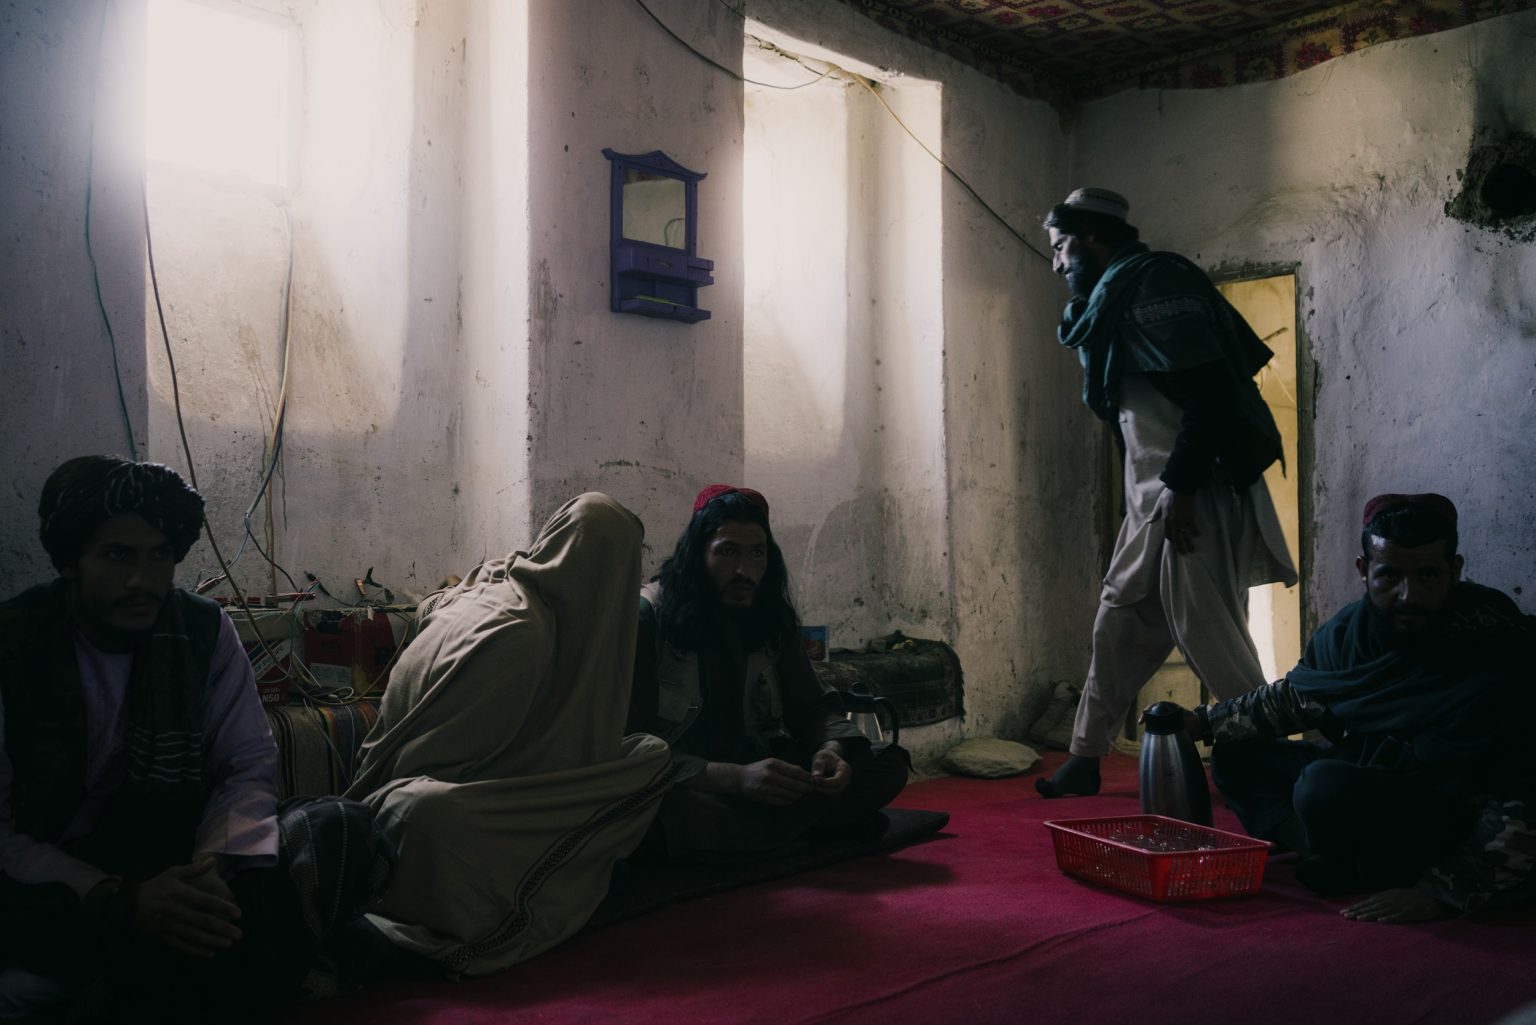 WARDAK, AFGHANISTAN - OCTOBER 14:
A group of Taliban militant gather in what used to be their hide out in the village of Andar. They used to stage attacks and plant IEDs along the stretch of Highway 1 near the village.
(Photo by Lorenzo Tugnoli/ The Washington Post)